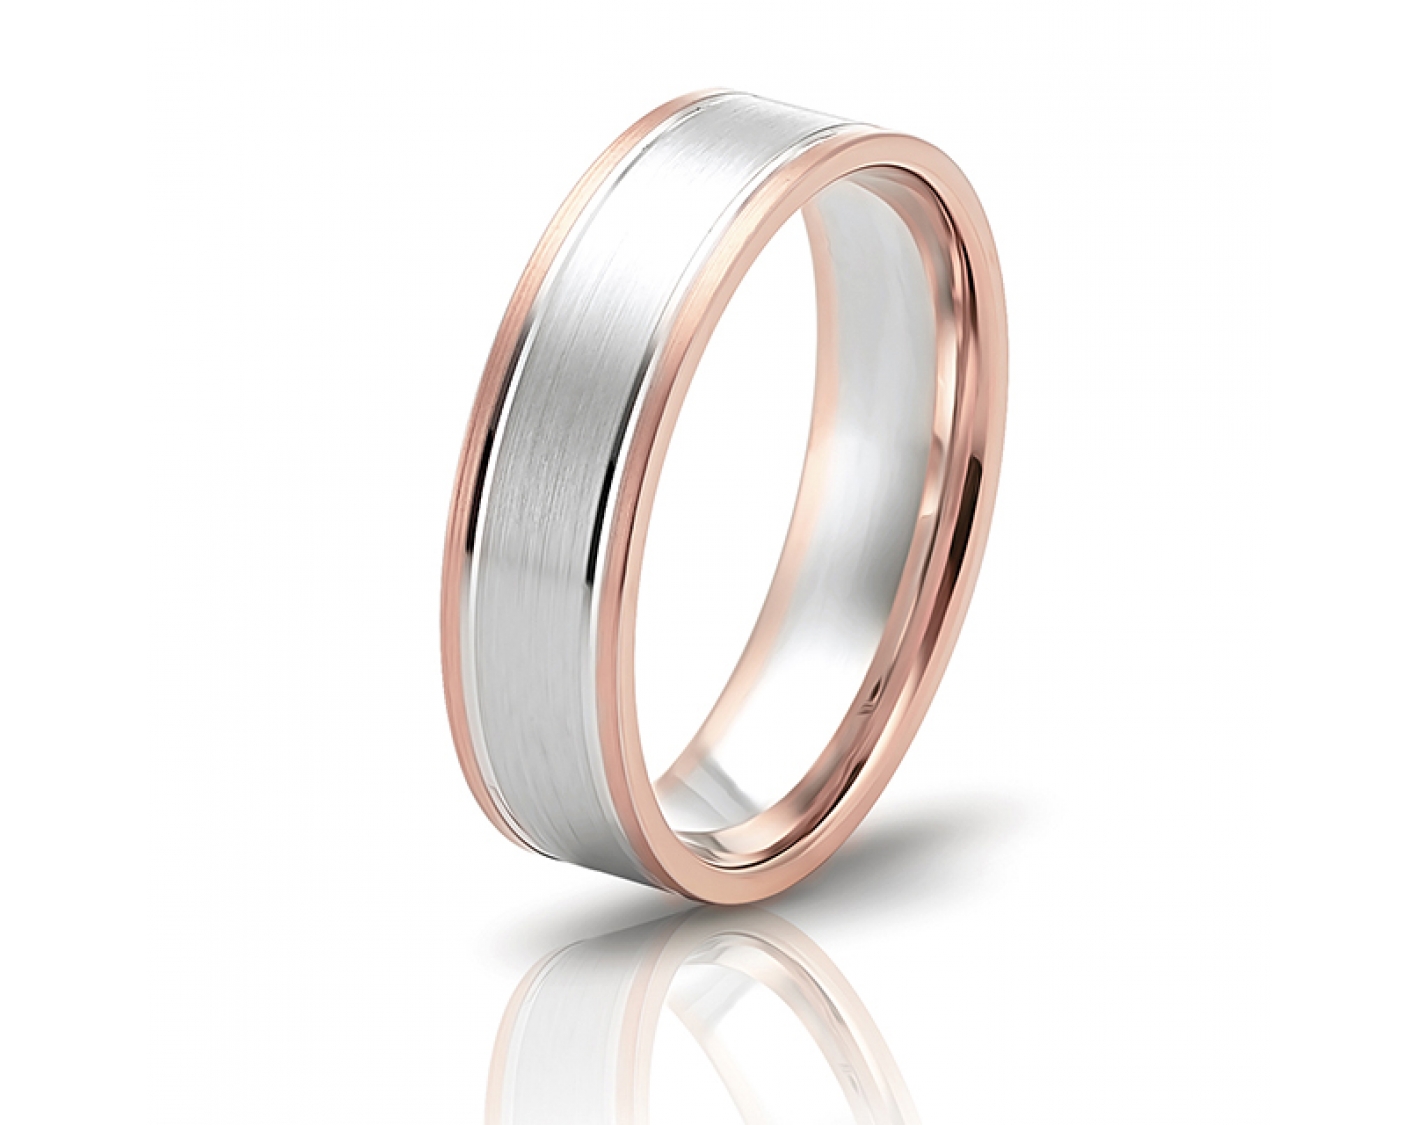 18k rose gold 6mm two-toned* matte wedding band with colored edges Photos & images